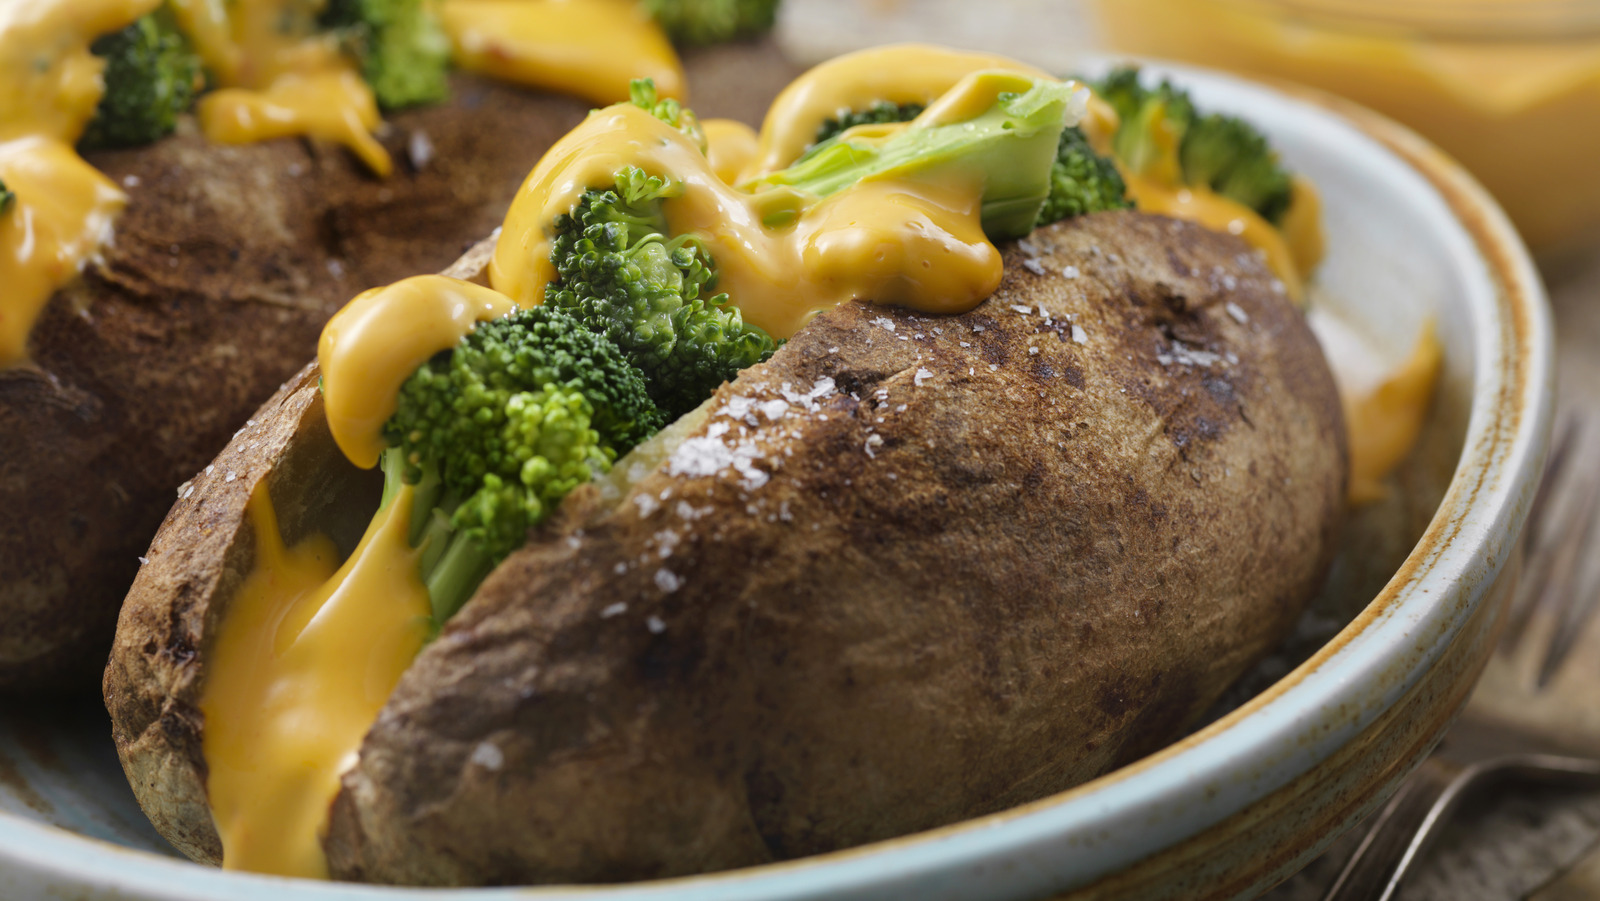 For the Best Baked Potatoes, Avoid the Oven